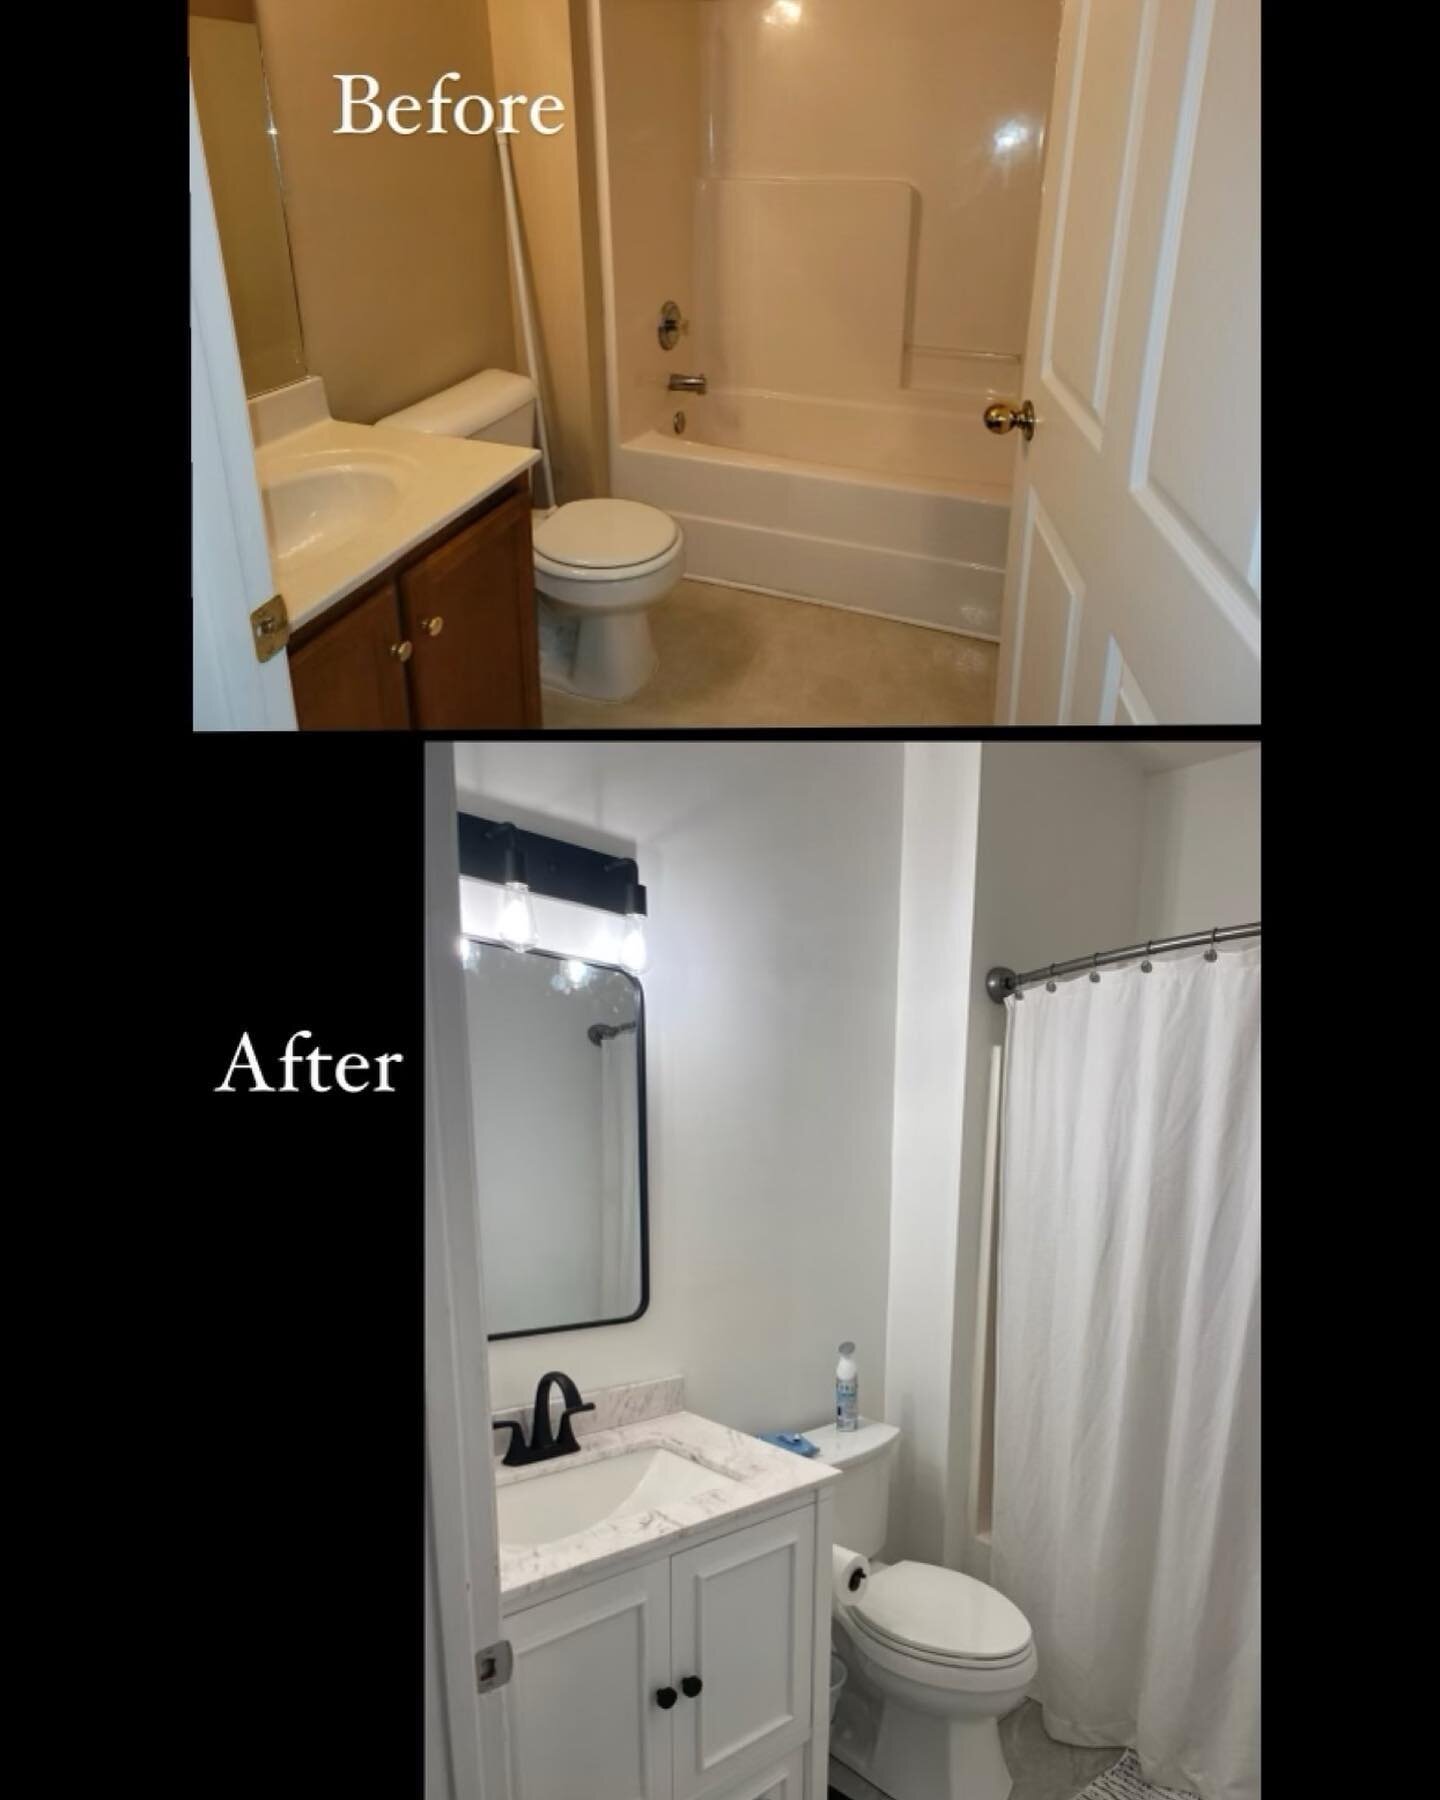 Bathroom remodel// @kristabharris @mkh96 project managers// @homedepot pro member #homedepot // @yonts09 tile saw loaner// and Buster the plumber who I met in the plumbing aisle of Home Depot, worth the price of wisdom// #bathroomremodel #kohler #way